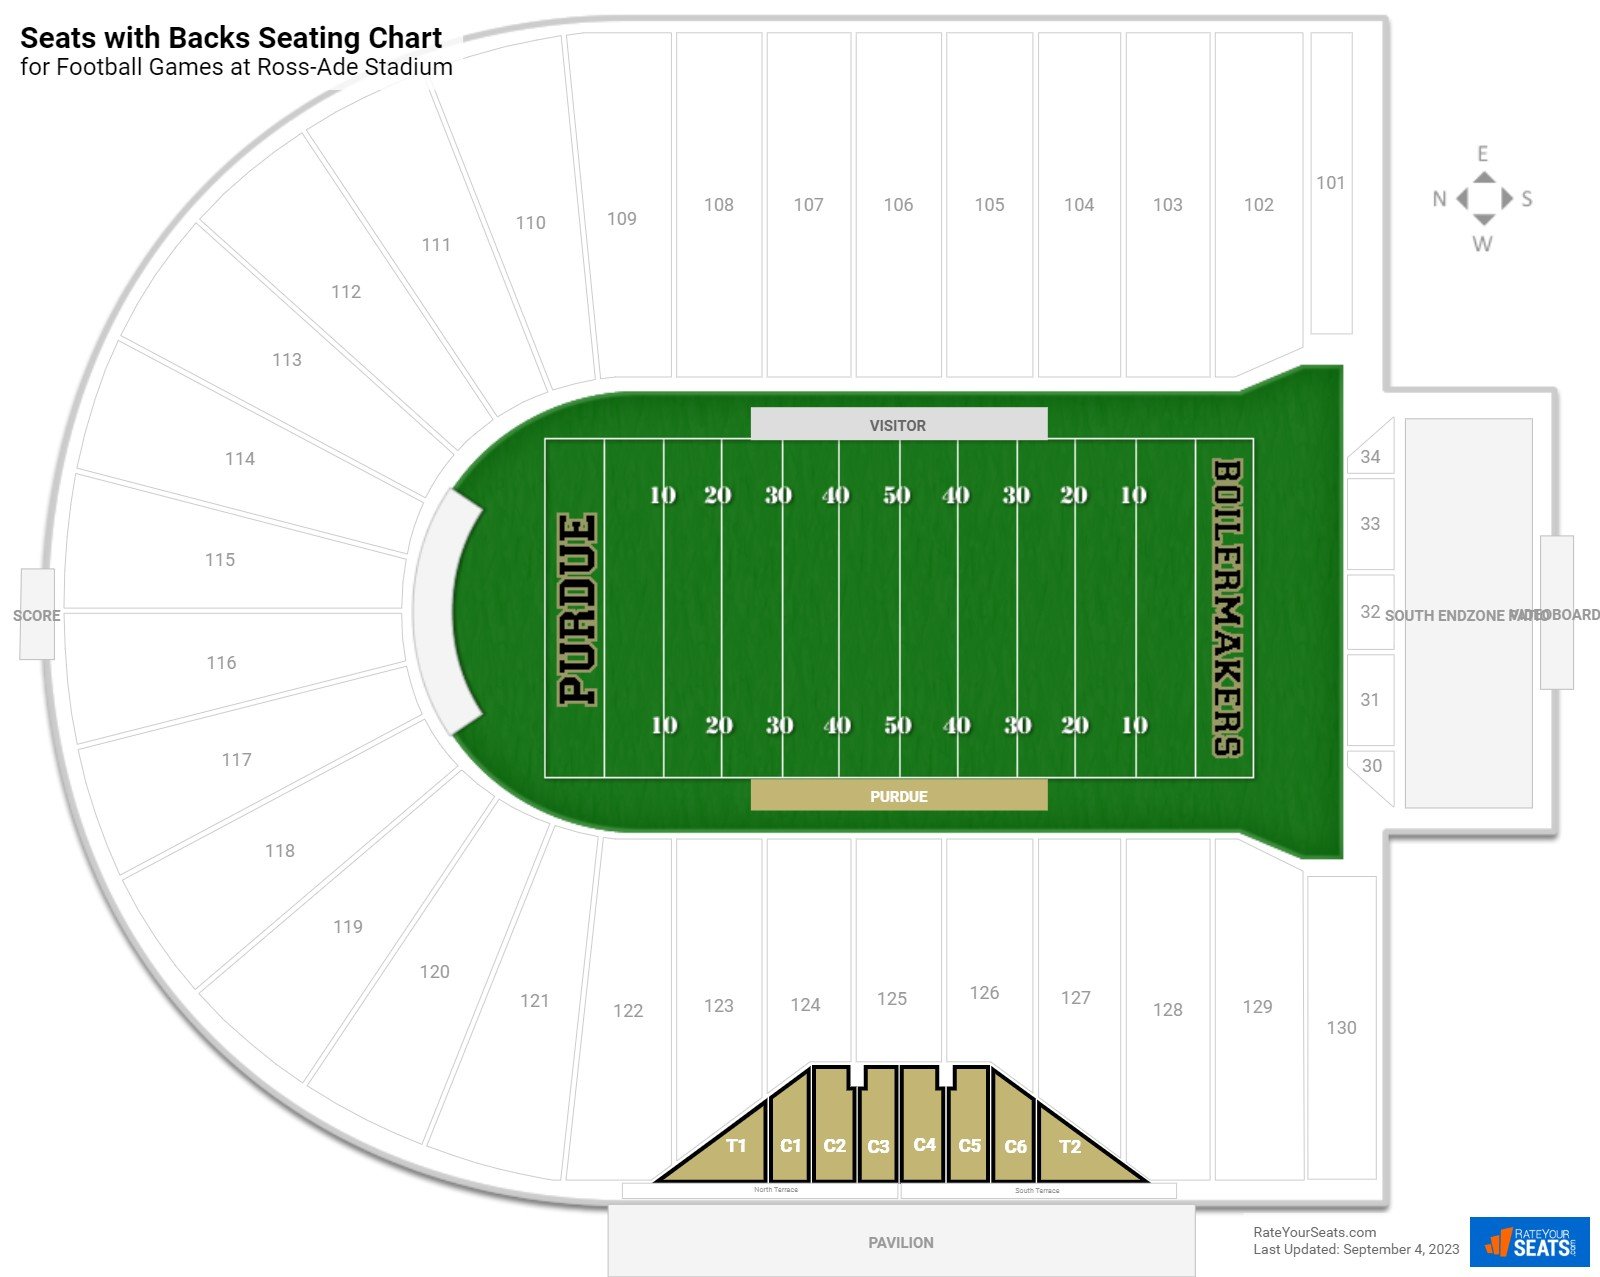 Football Seats with Backs Seating Chart at Ross-Ade Stadium